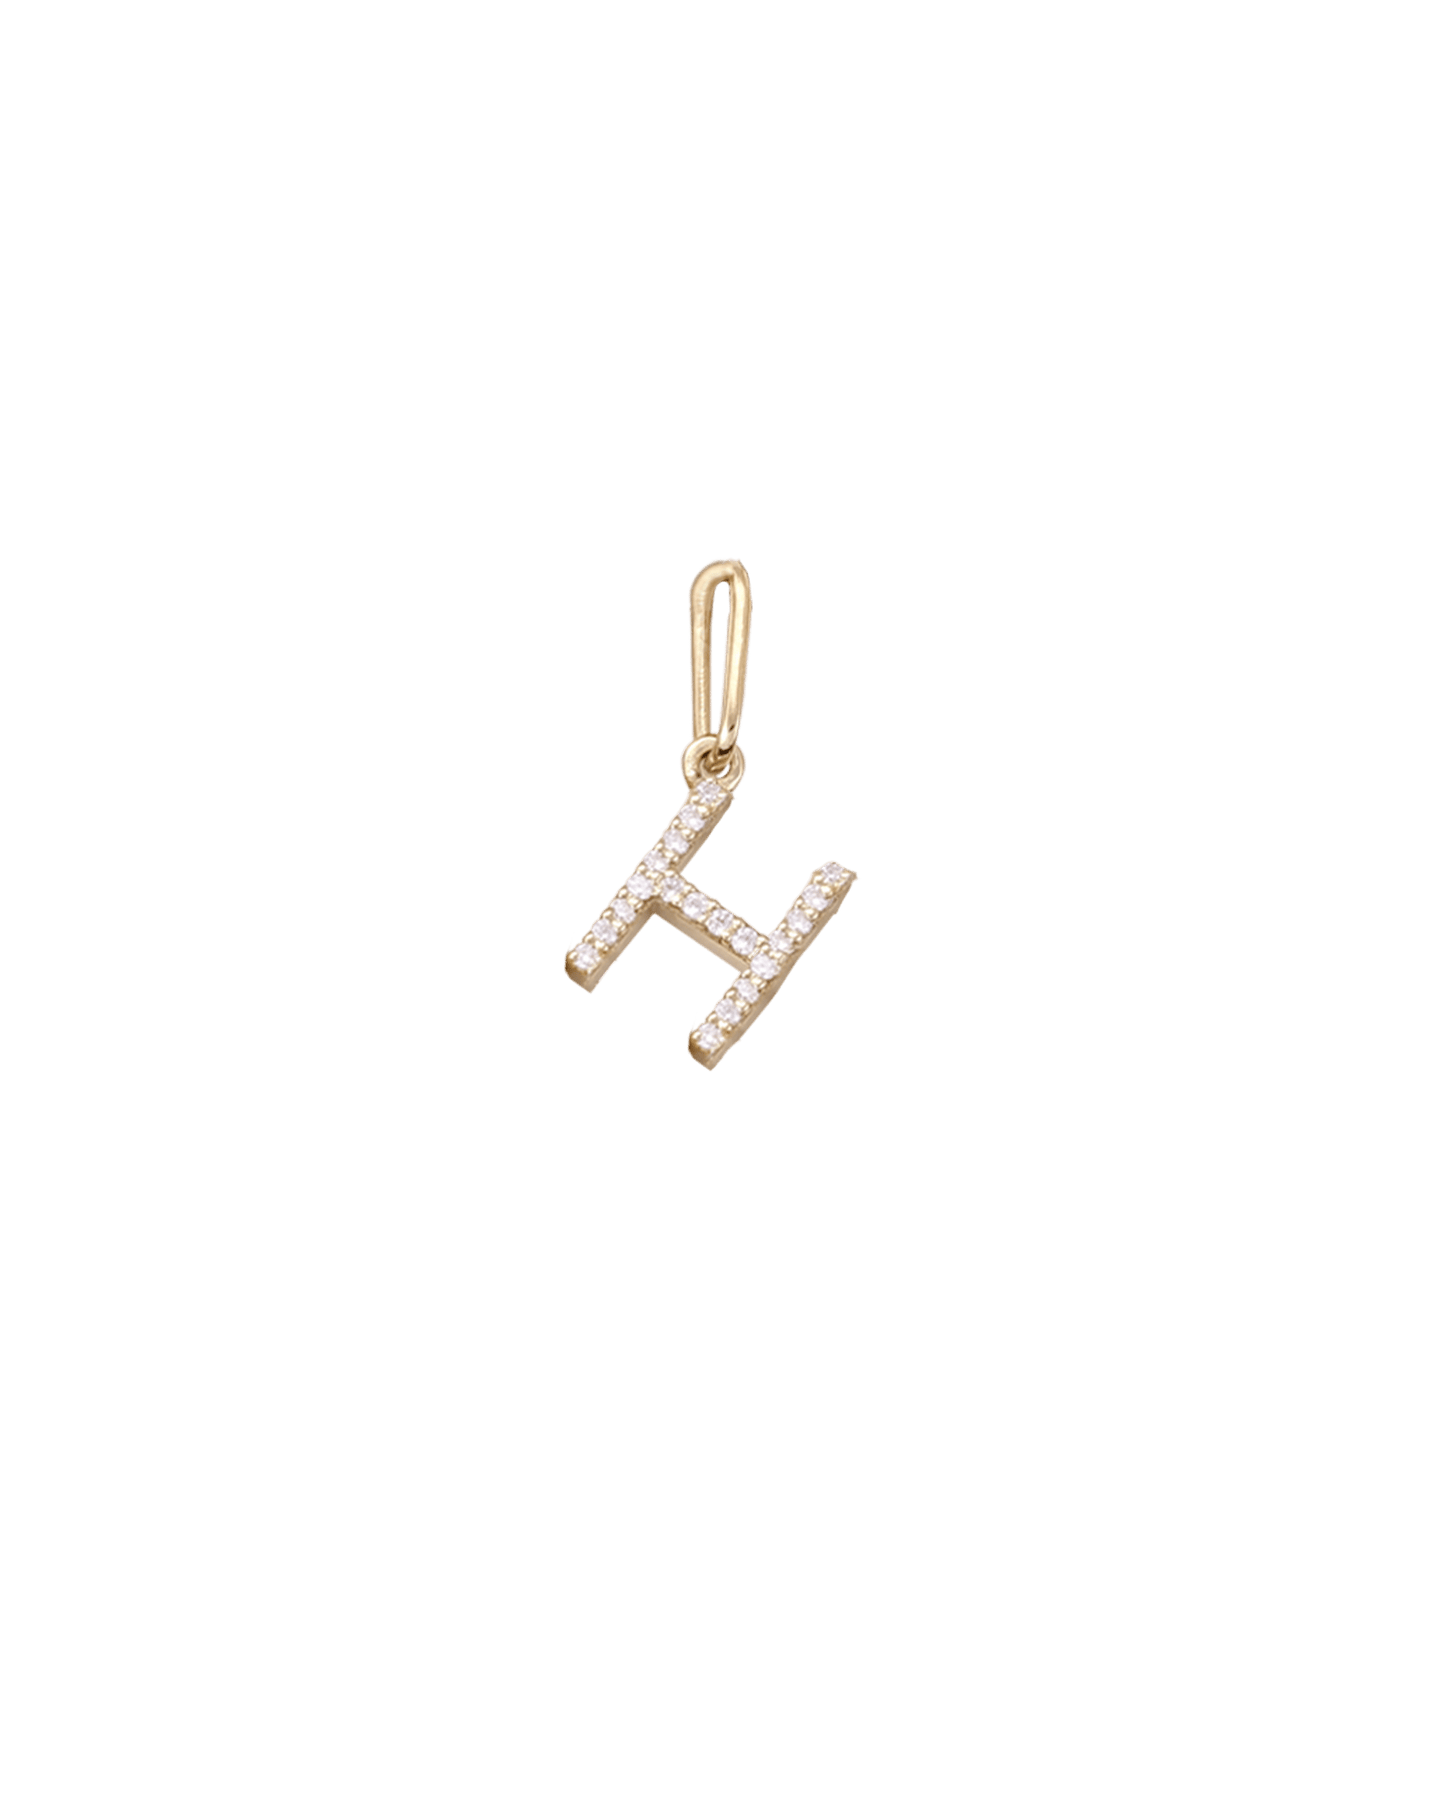 Frosted Charm - 14K Yellow Gold Charm magal-dev 